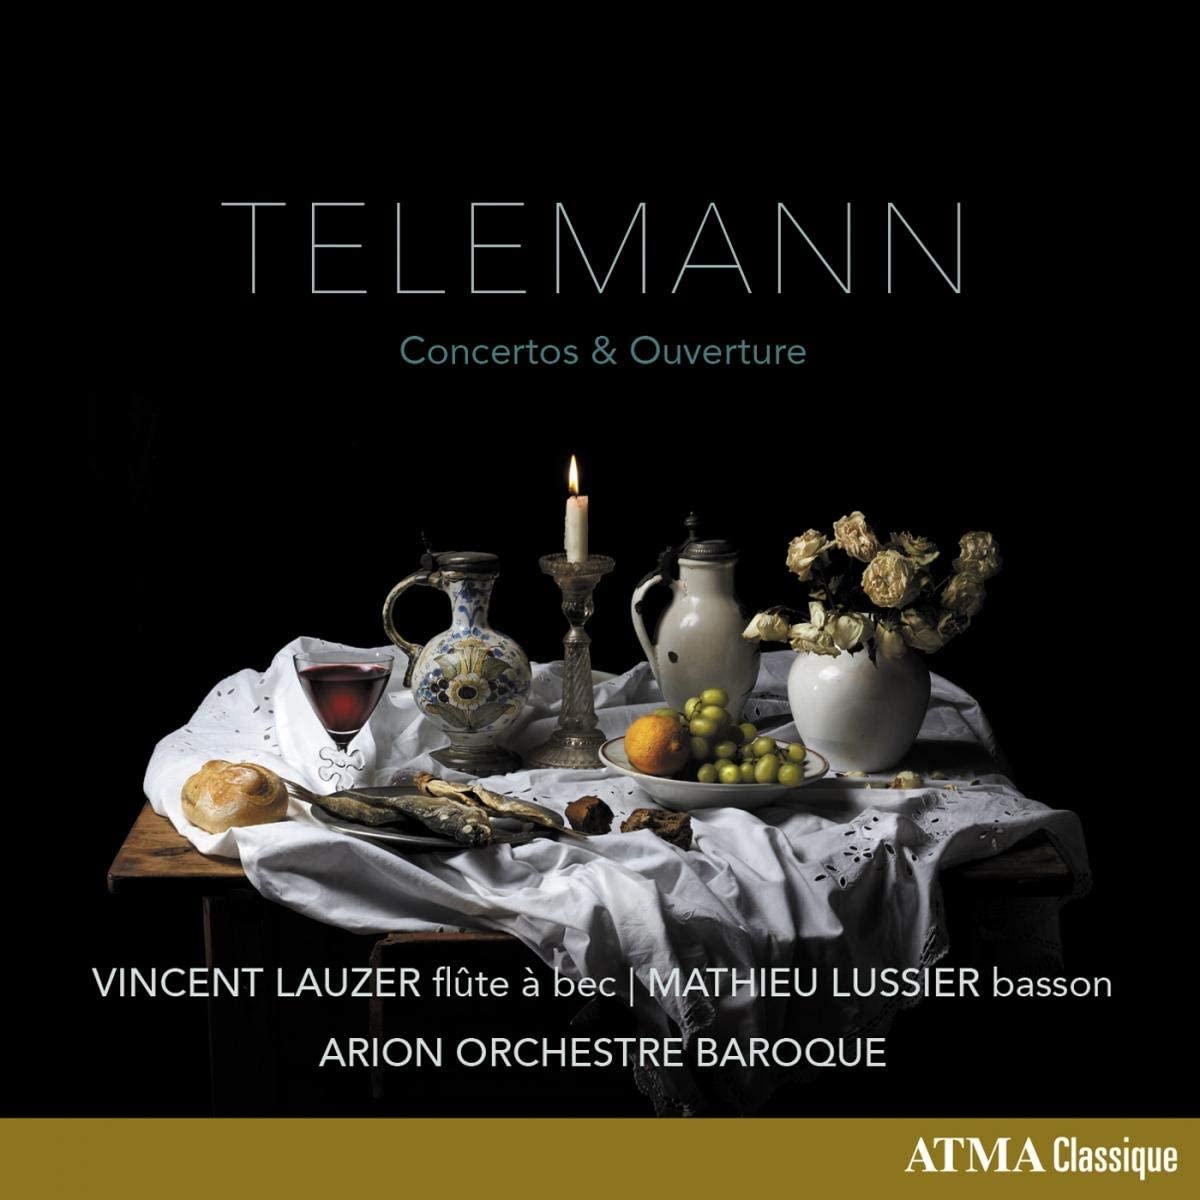 Lauzer and Lussier play Telemann with Arion Orchestre Baroque on Atma classique